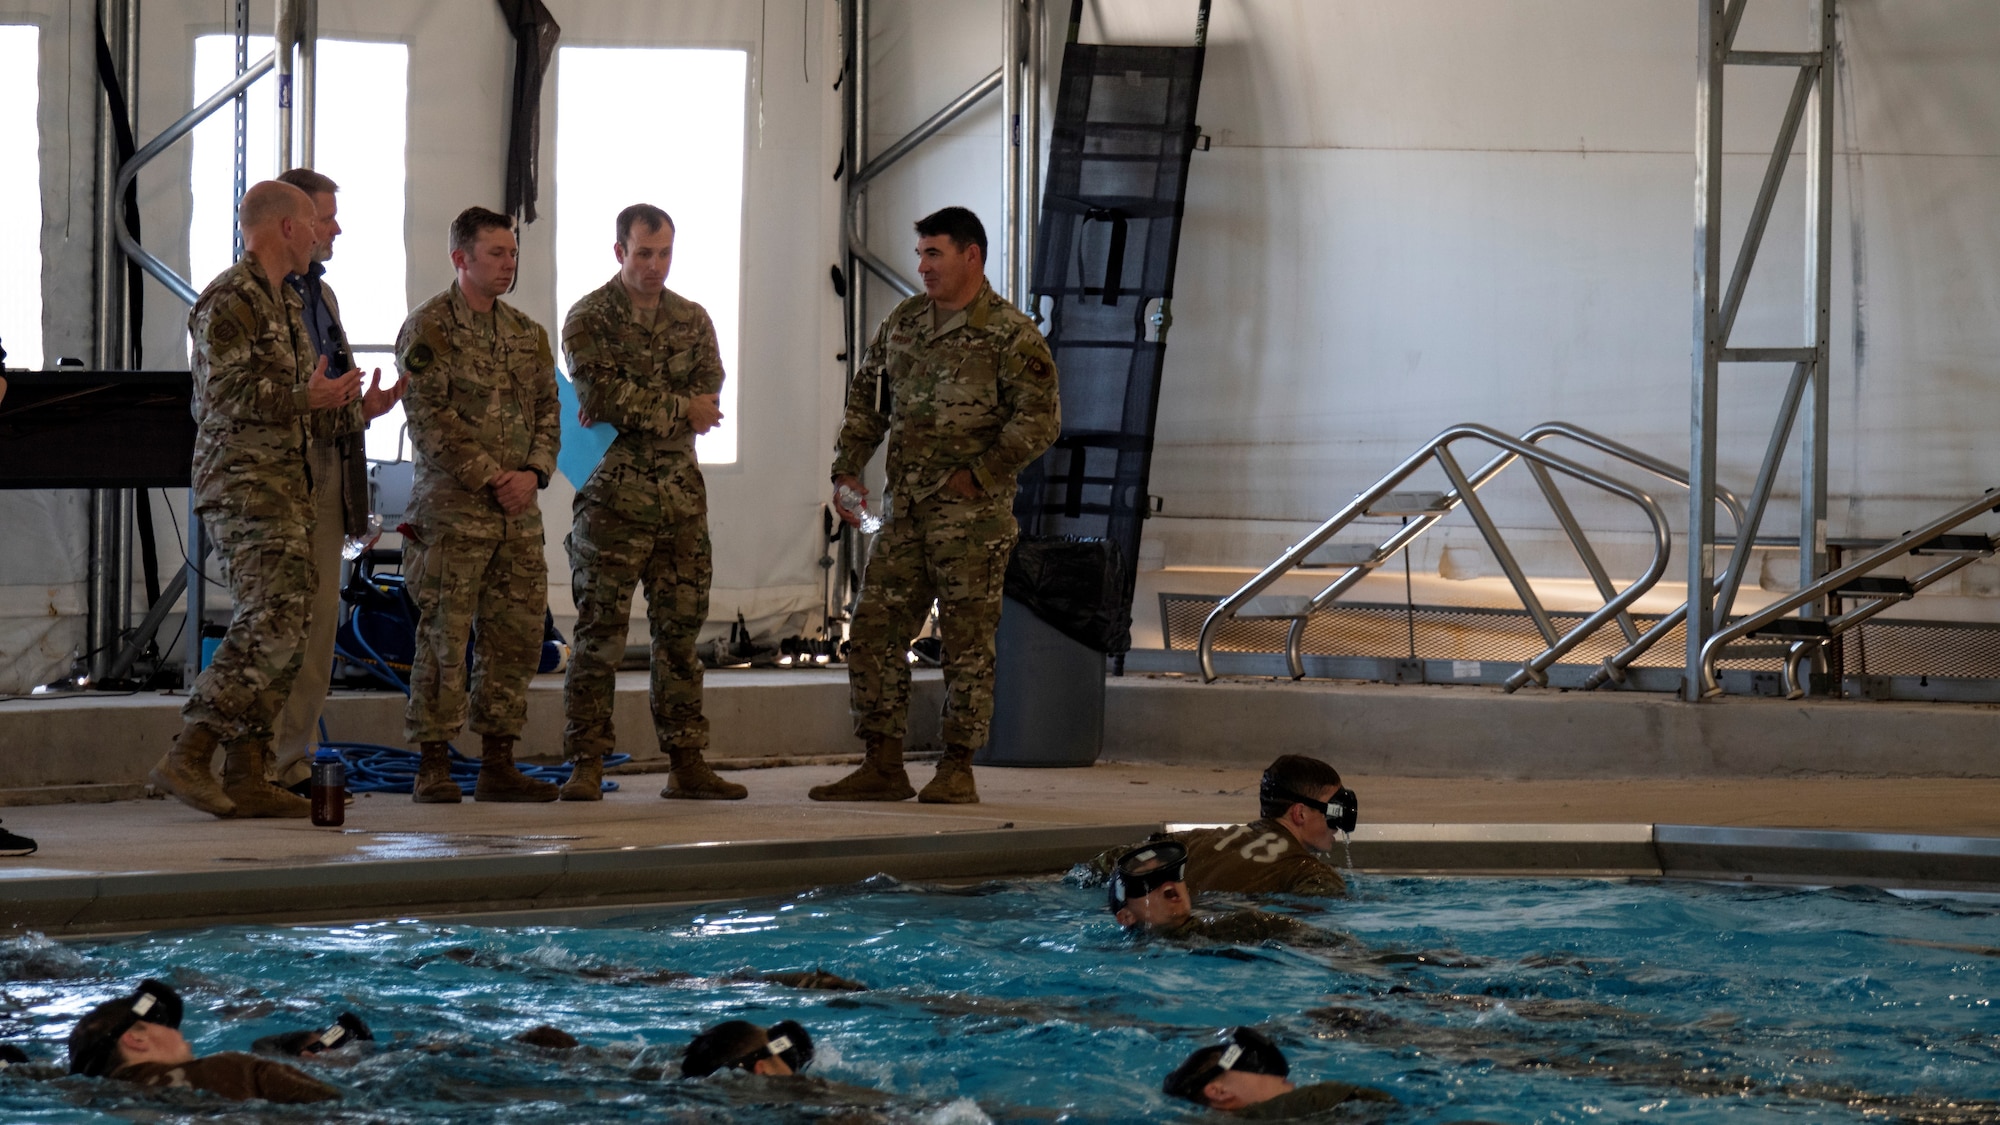 U.S. Air Force Maj. Gen. Matthew Davidson (far right), Air Force Special Operations Command director of operations, discusses aspects of Assessment and Selection with Col. Mason Dula (far left), SWTW commander, at Chaparral Pool on Joint Base San Antonio-Lackland, Texas, Mar. 15, 2022. One third of graduates from the Special Warfare Training Wing pipelines will feed directly into operational AFSOC units, to include Combat Controllers, Special Reconnaissance Airmen, Special Tactics Officers, and some Pararescuemen.